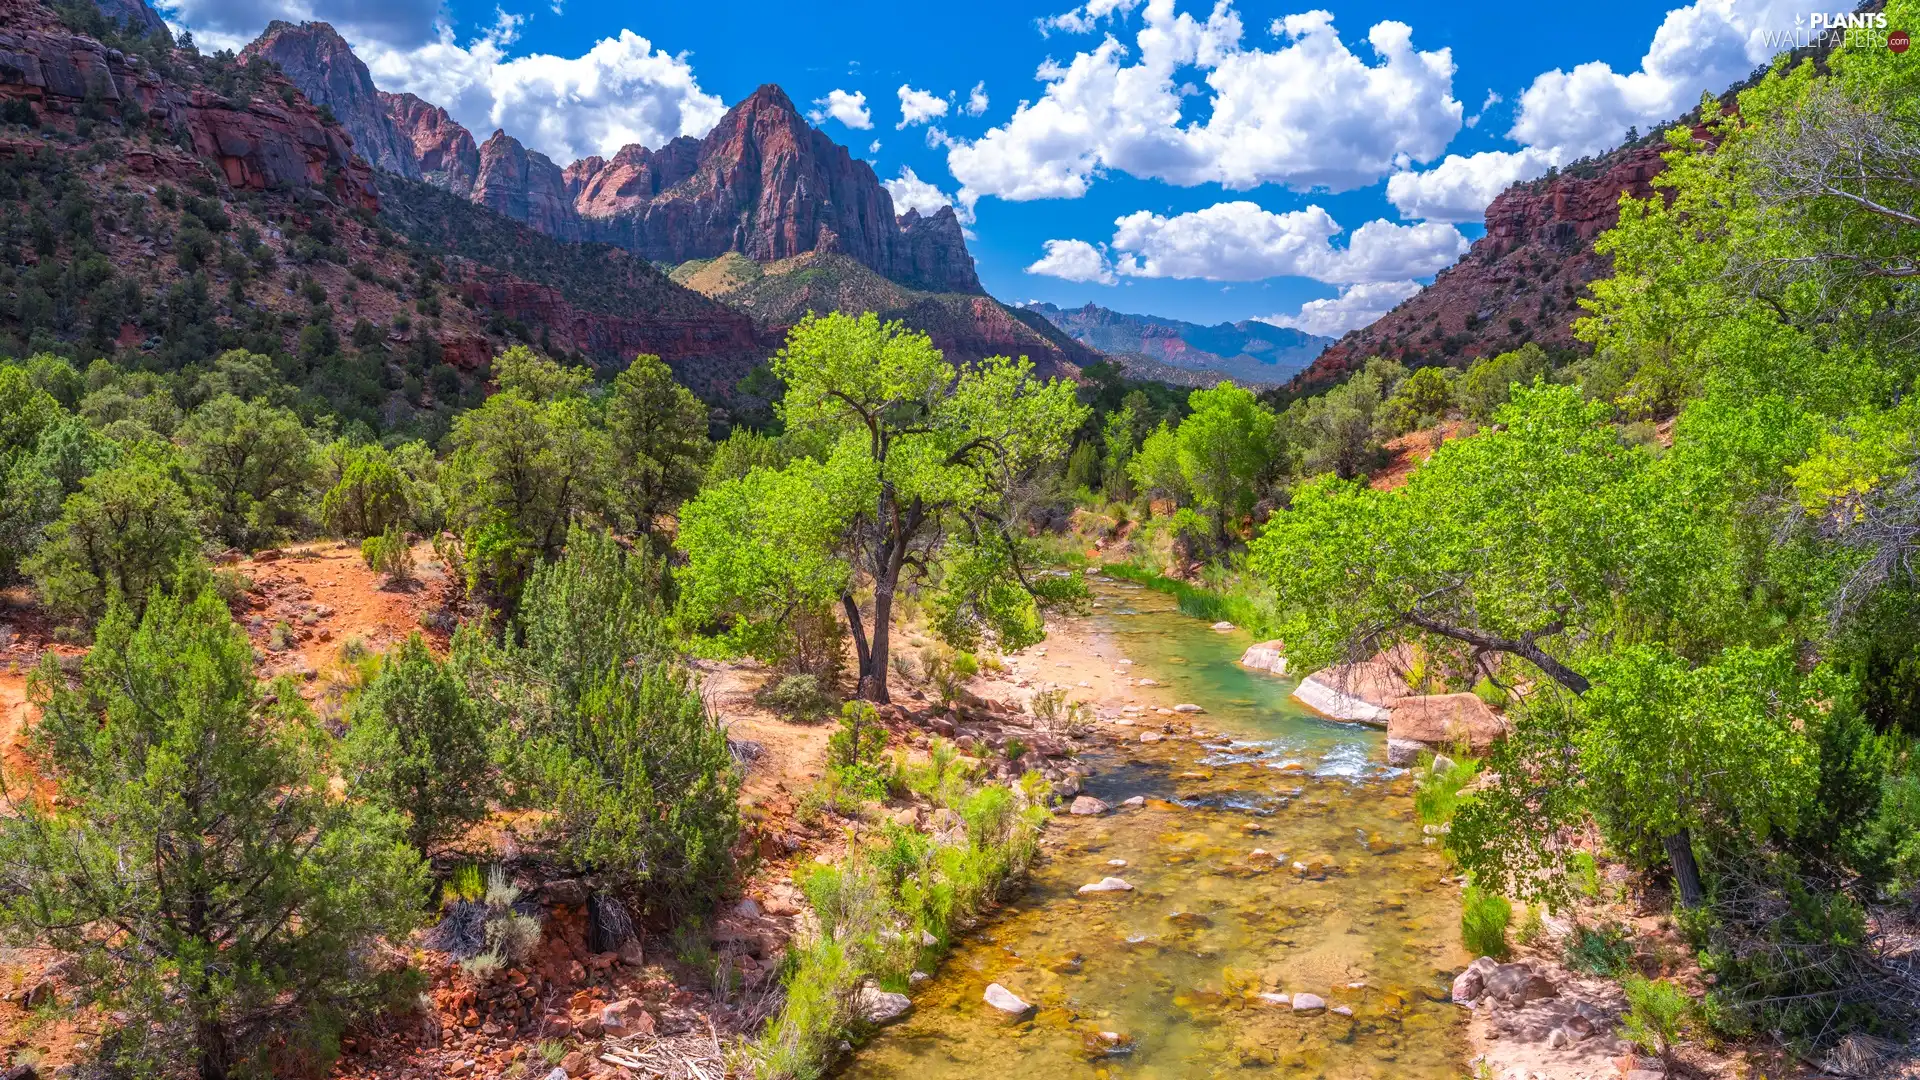 trees, viewes, The United States, clouds, Utah State, Watchman Mountains, Zion National Park, Virgin River